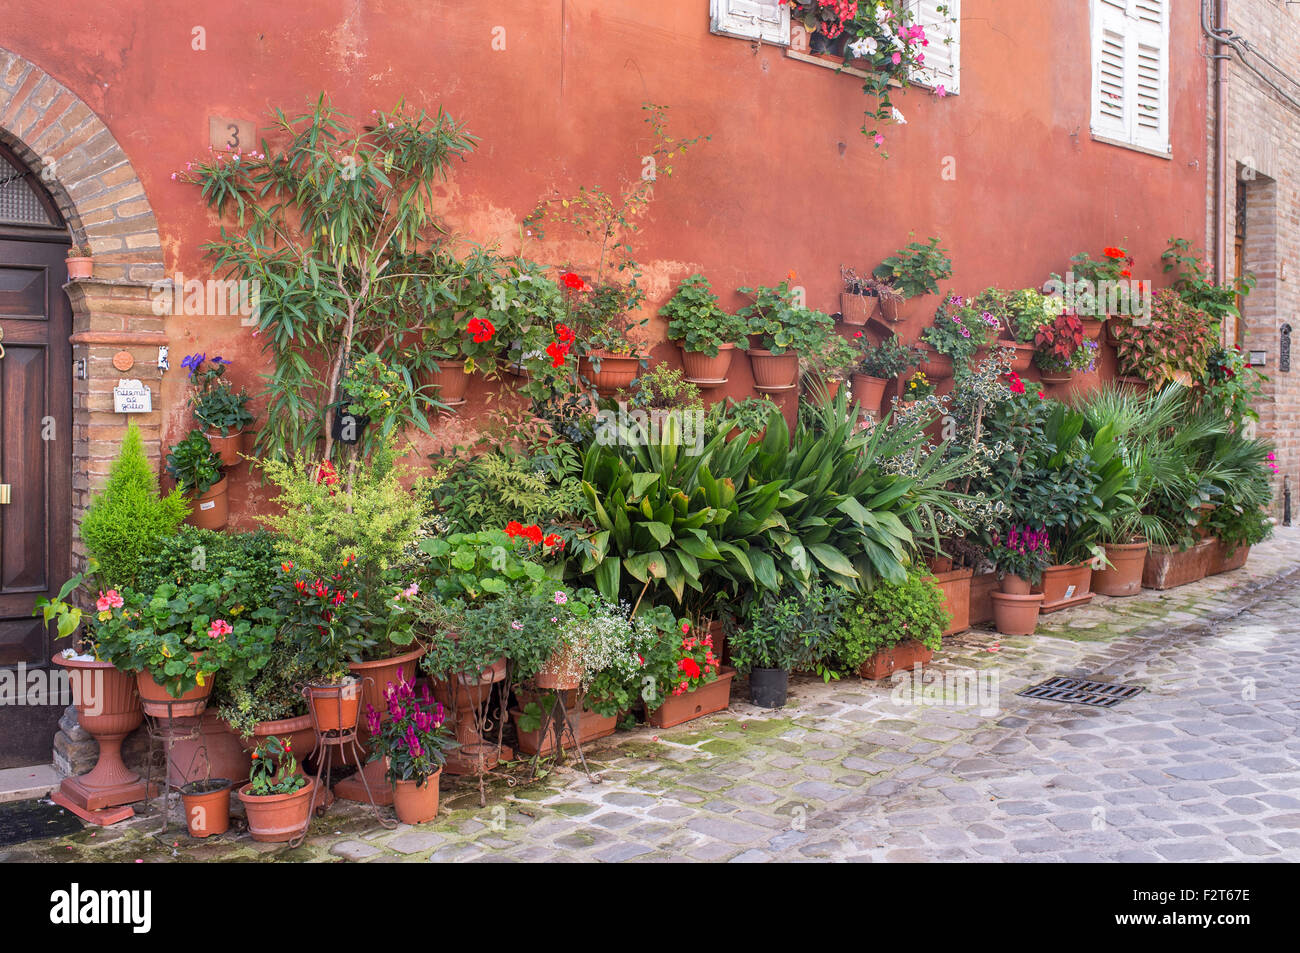 House with Street Garden of Pots and Hanging Baskets in Amandola Italy Stock Photo